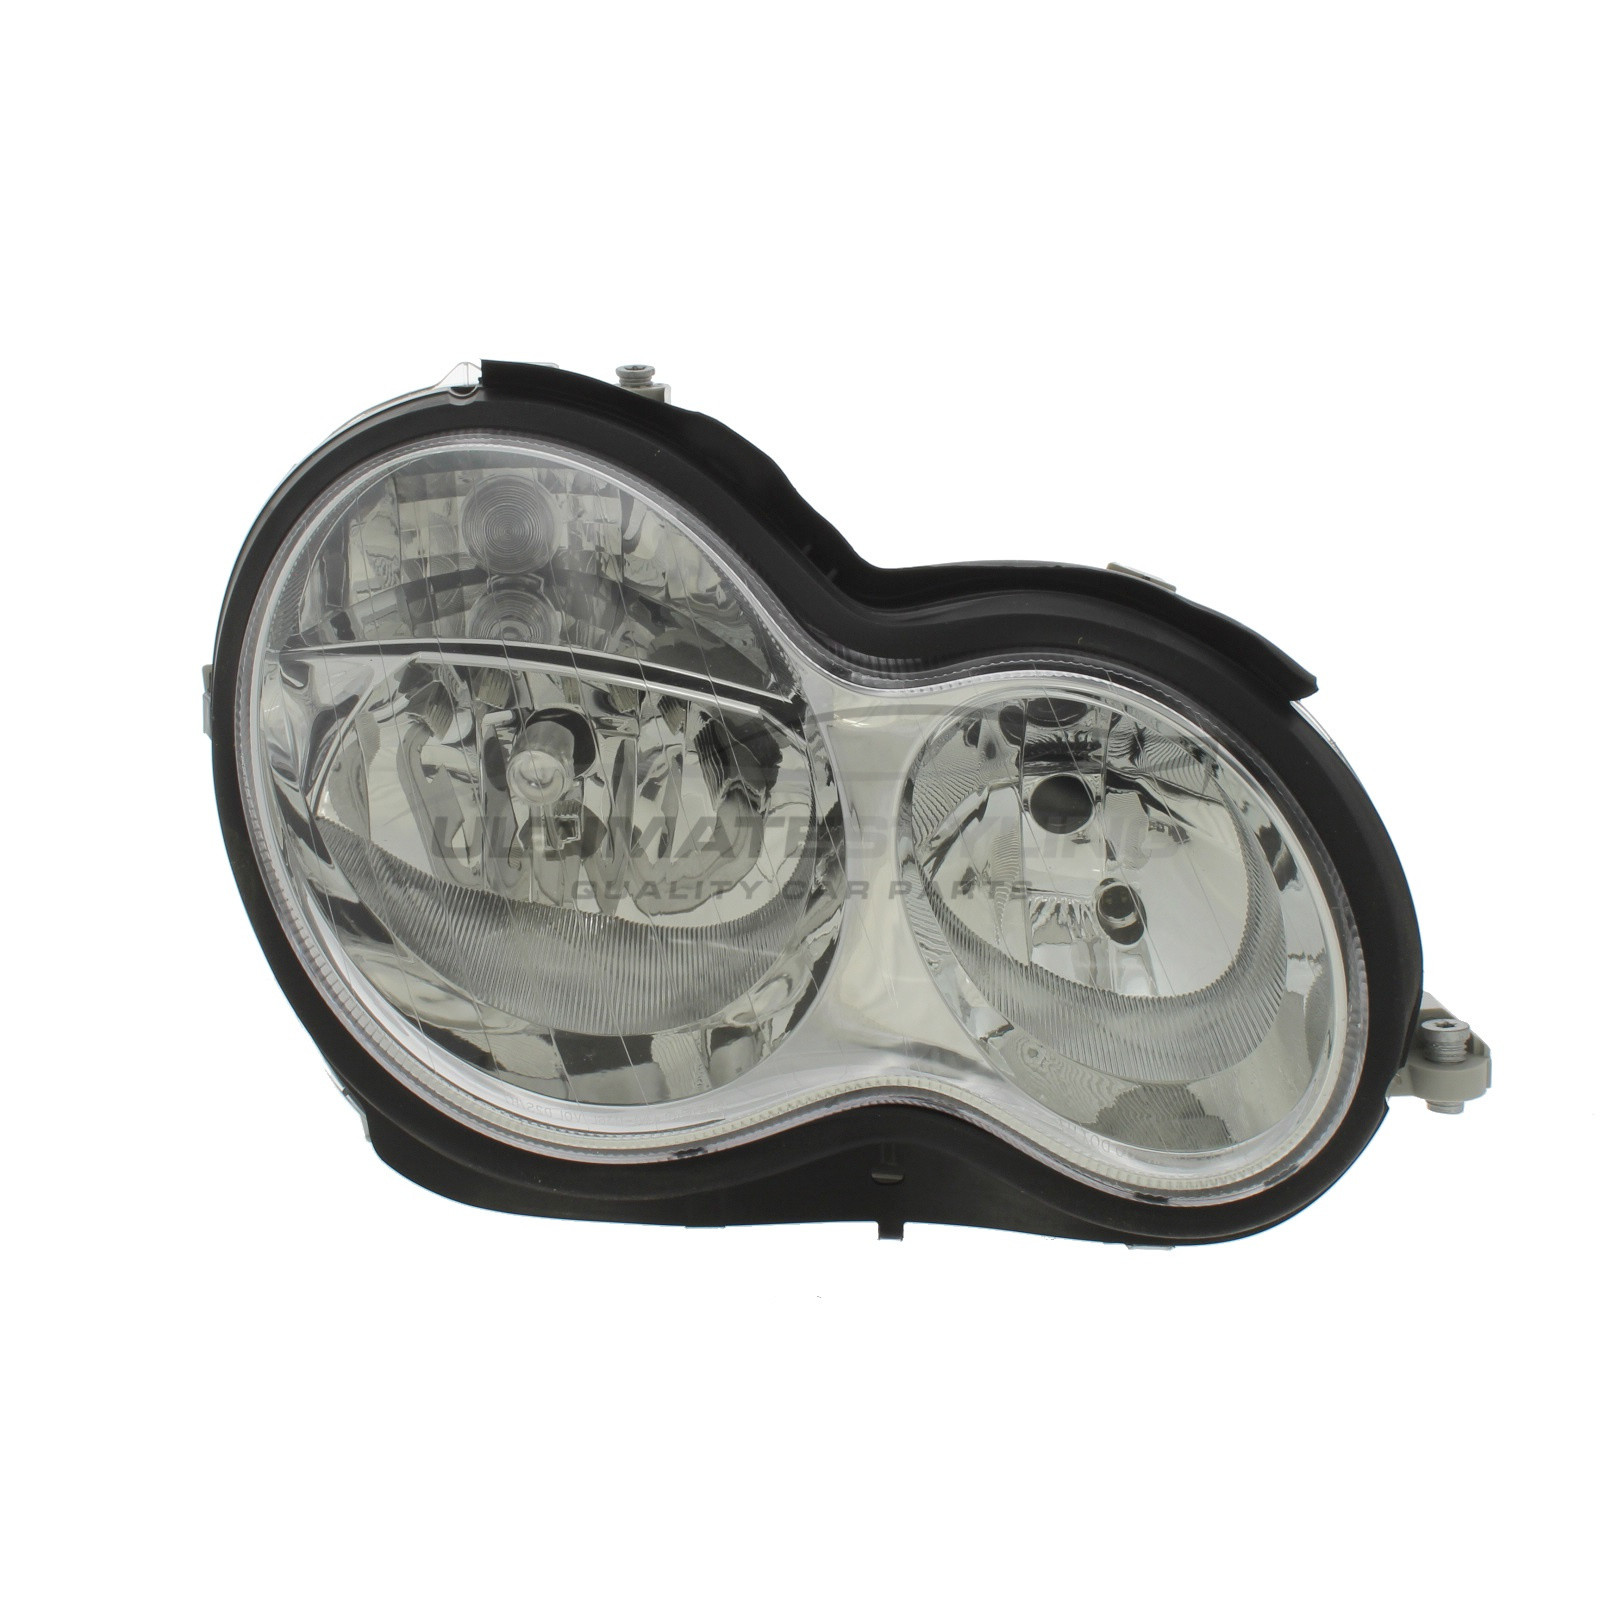 Mercedes Benz C Class 2002-2008 Halogen, Electric Without Motor, Chrome Headlight / Headlamp (Clear Lens) Drivers Side (RH)